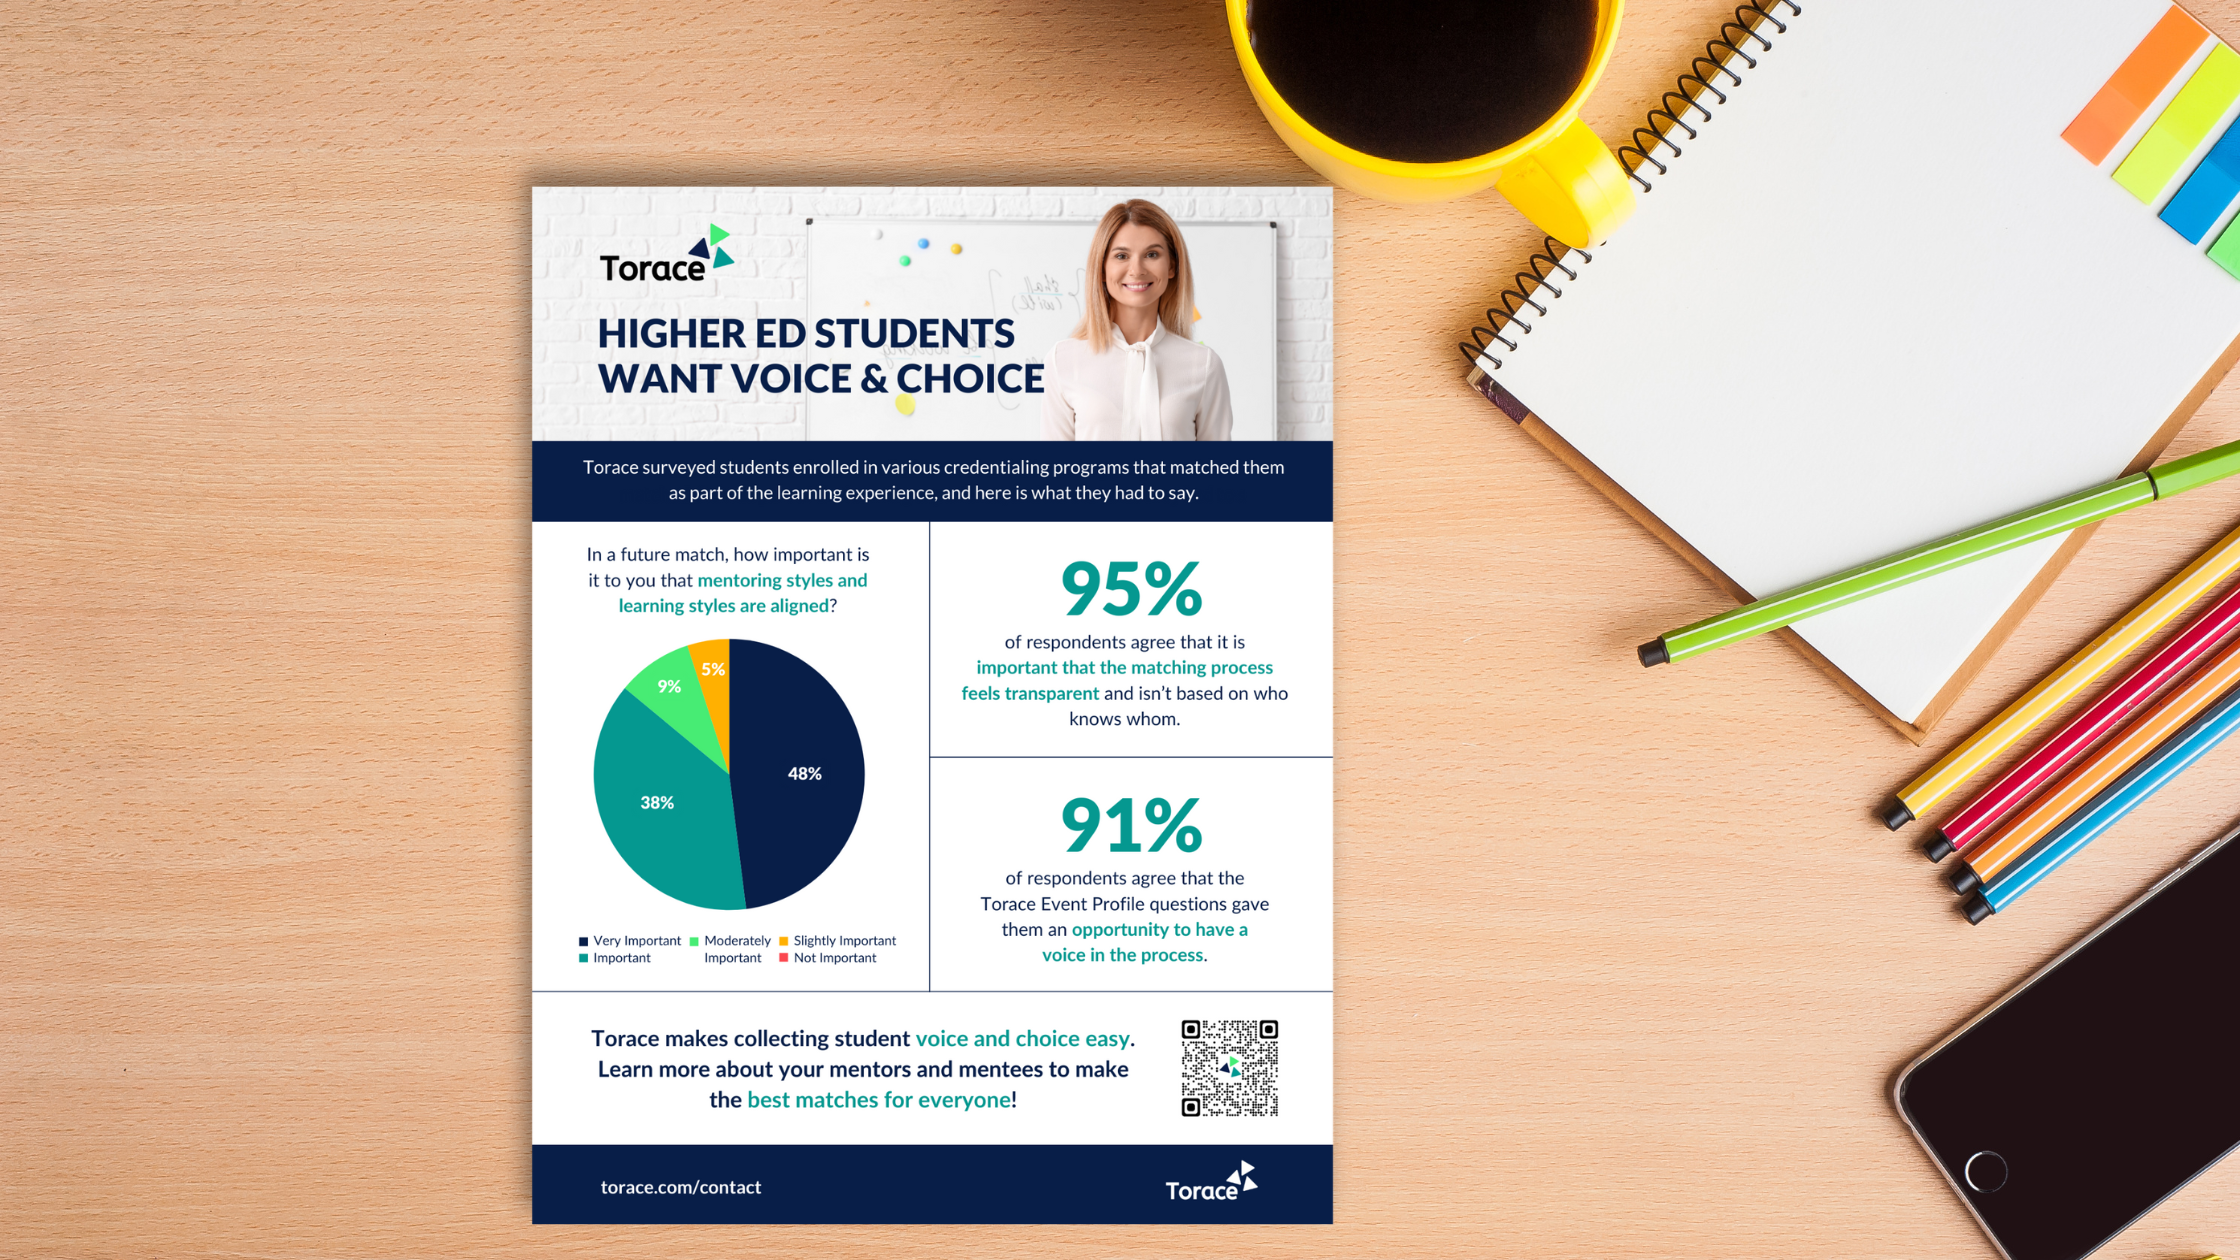 Infographic: Higher Ed Students Want Voice & Choice on a desk with a coffee cup, notebook, markers, and a phone.